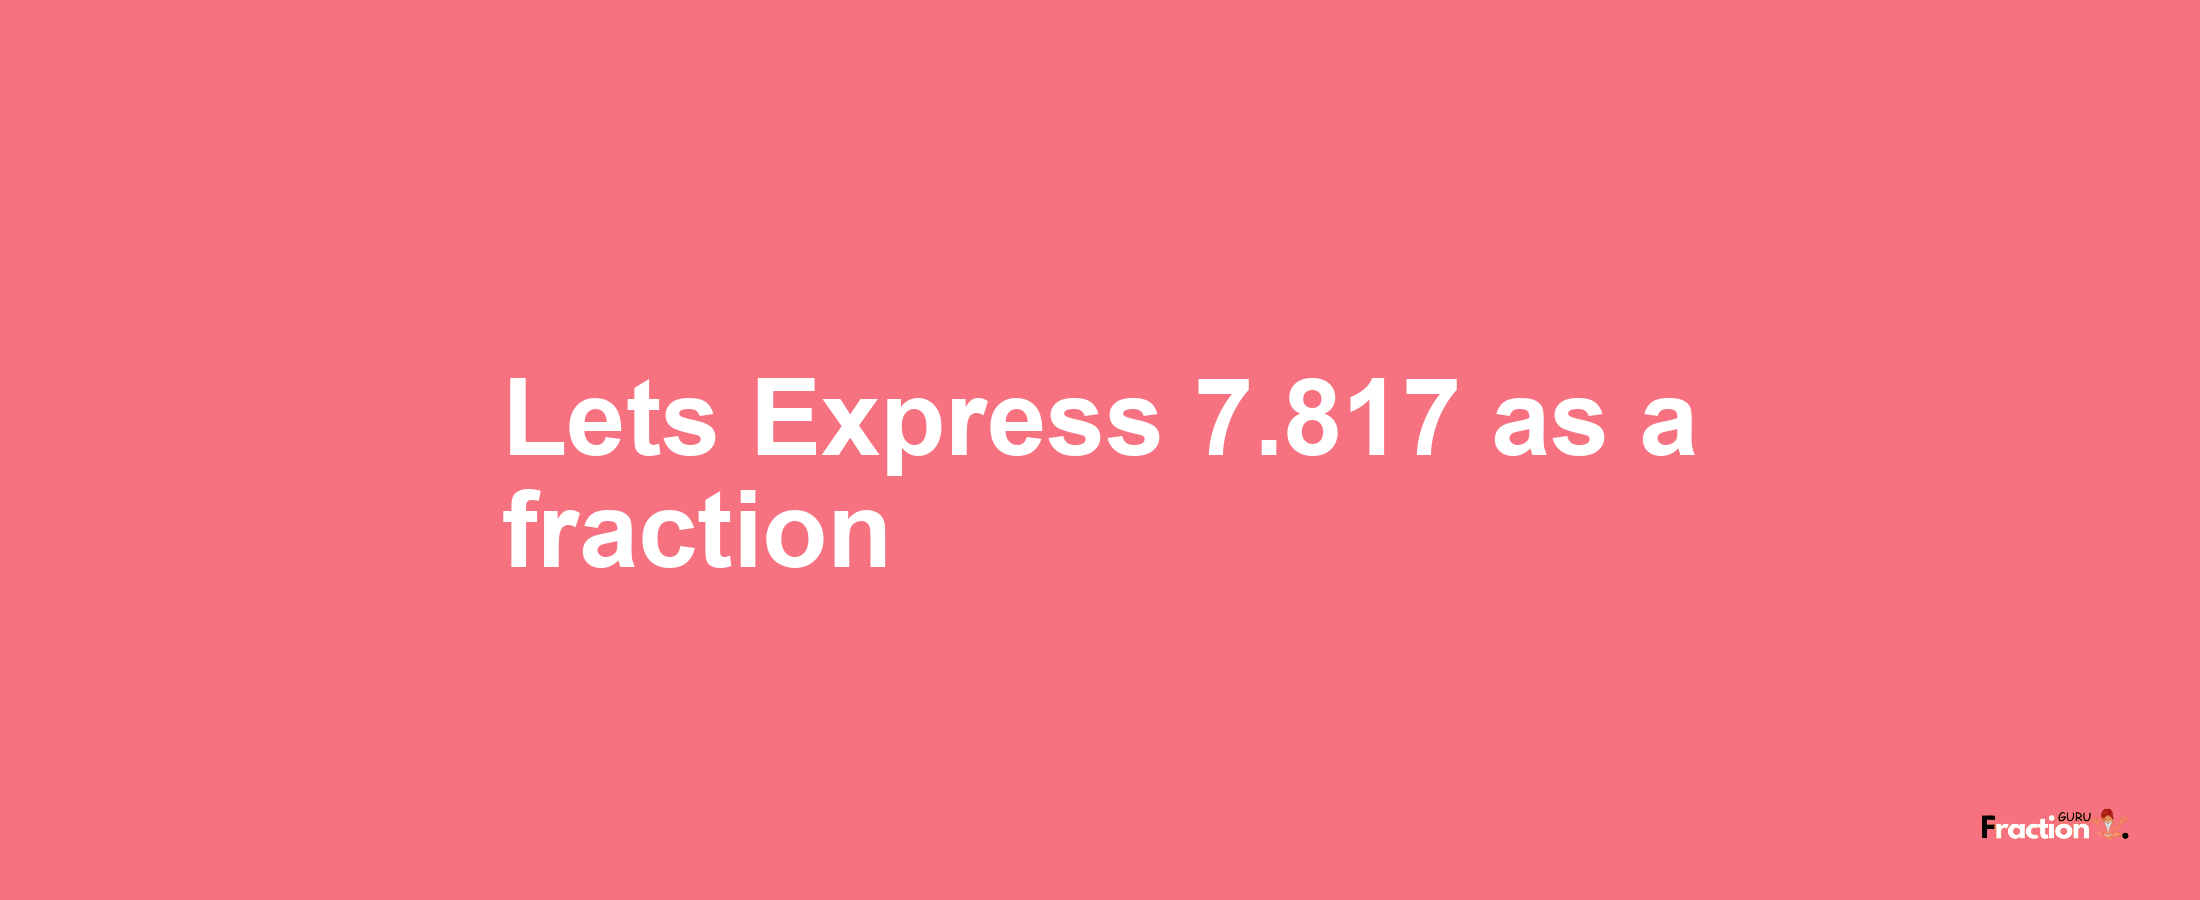 Lets Express 7.817 as afraction